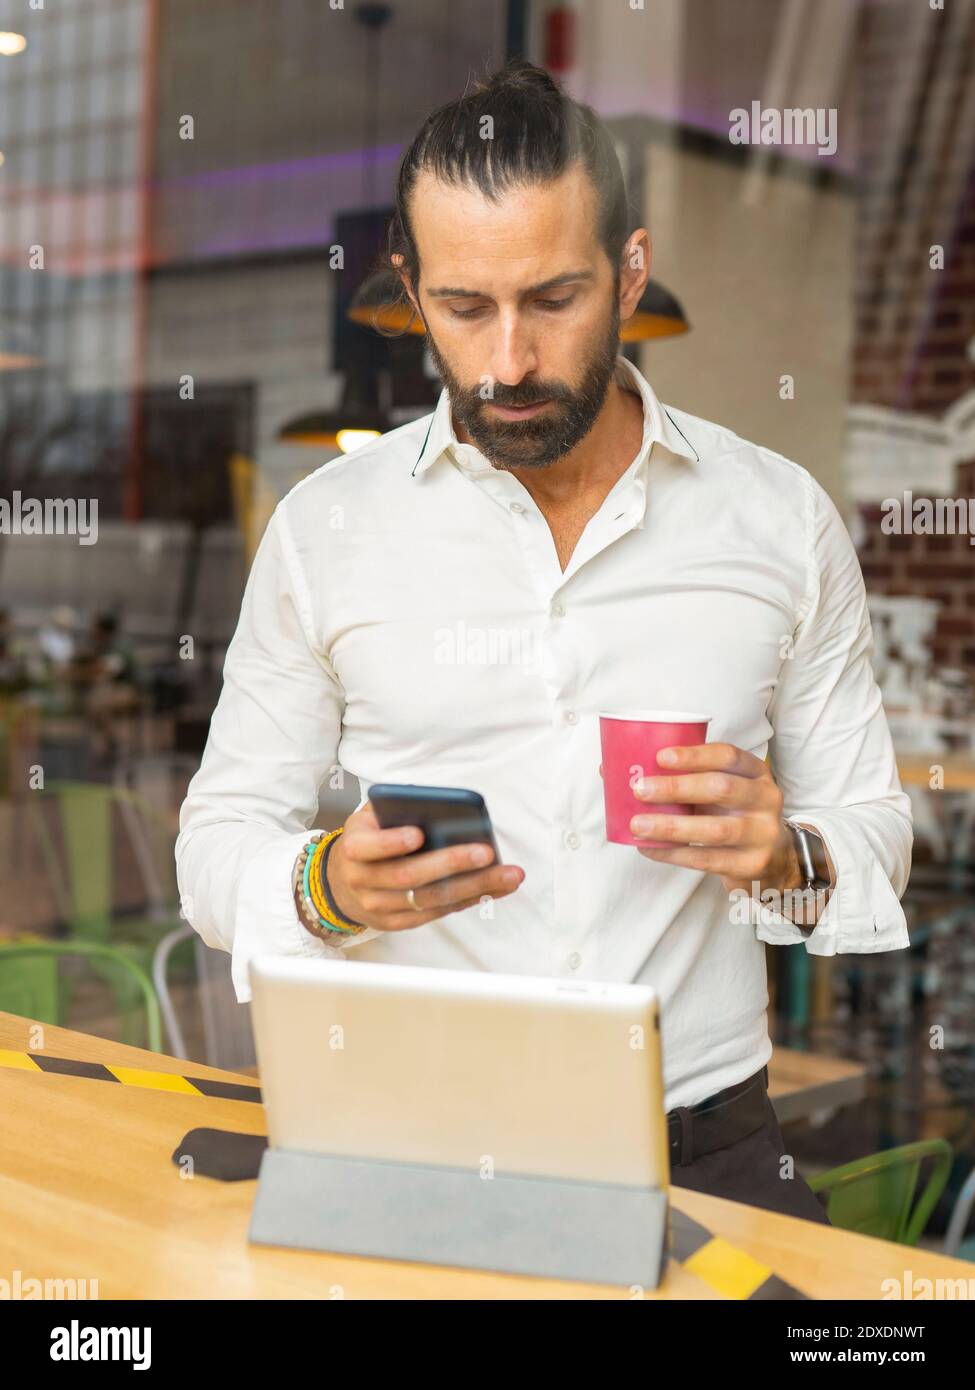 Candid portrait of bearded businessman drinking coffee and using phone inside cafe Stock Photo